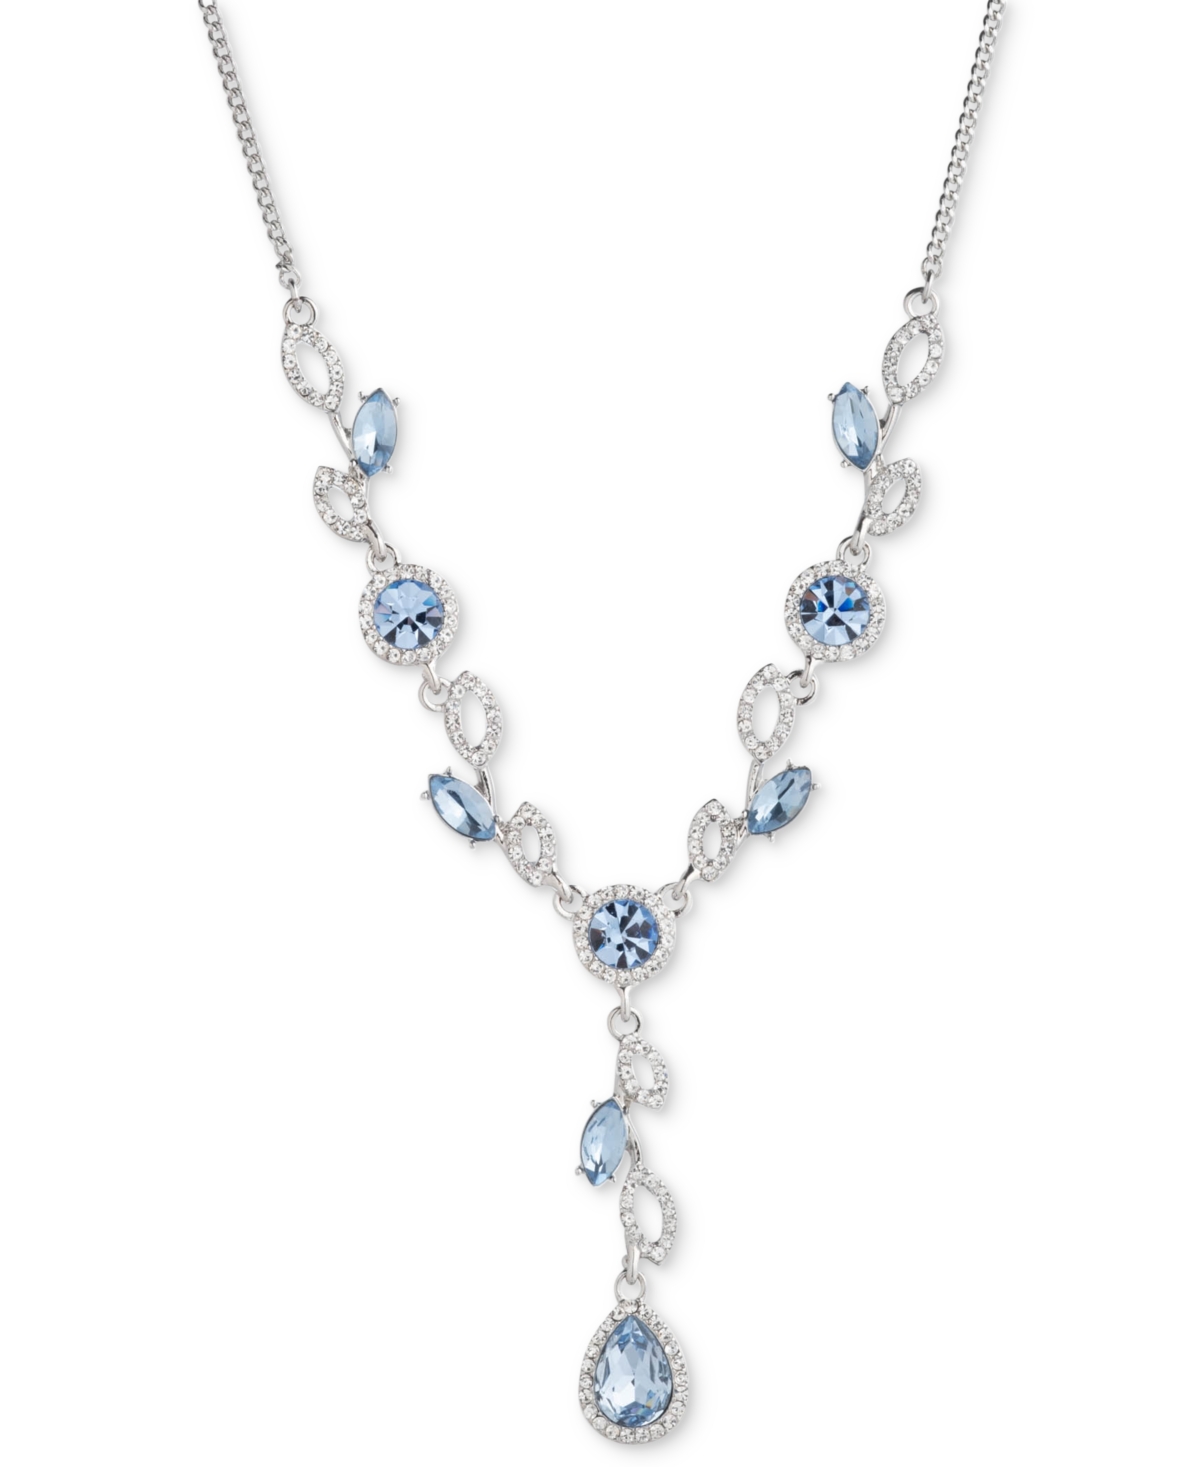 Givenchy Pave & Blue Crystal Lariat Necklace, 16" + 3" Extender In Metallic